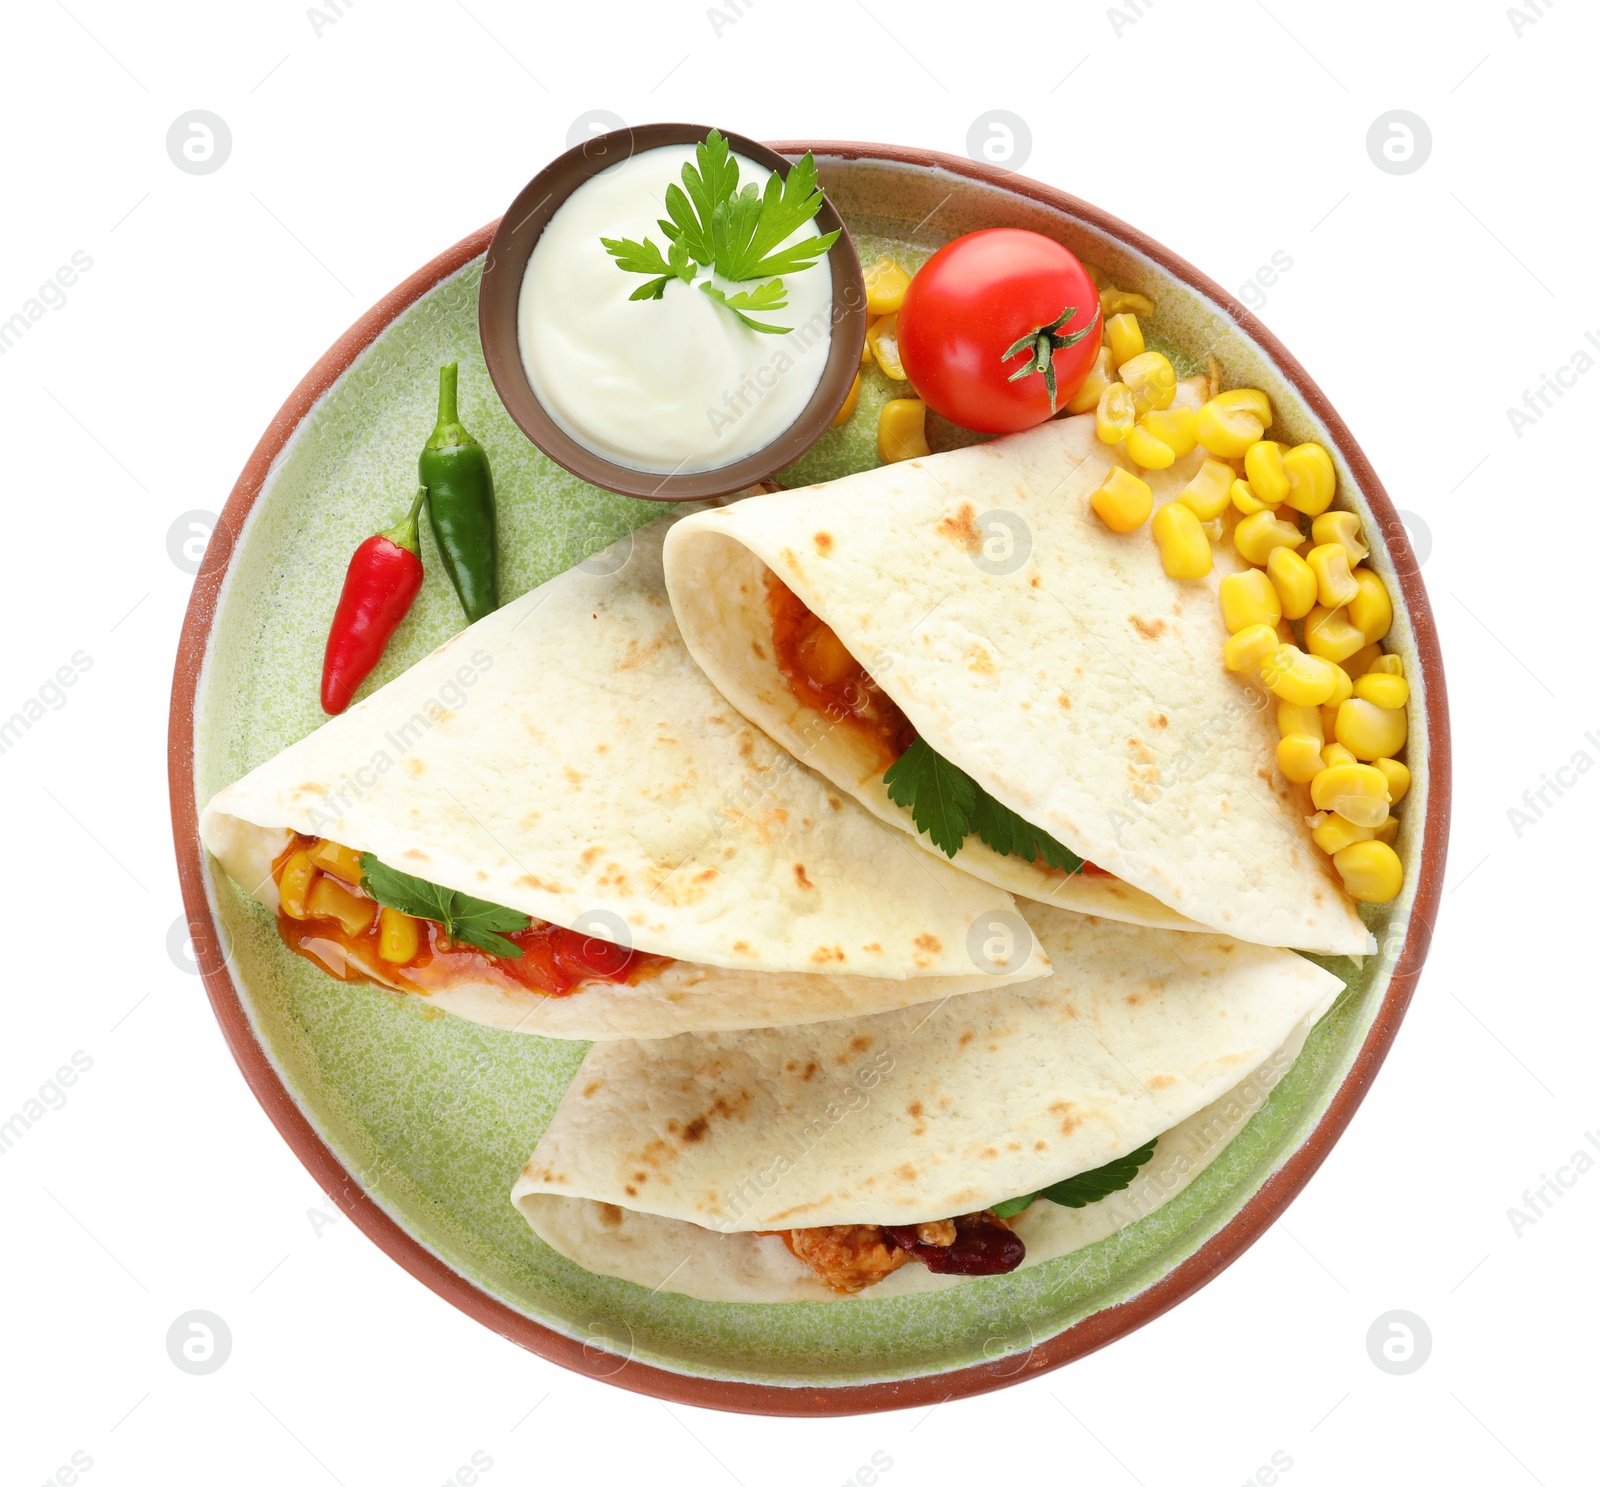 Photo of Plate of tortillas with chili con carne on white background, top view